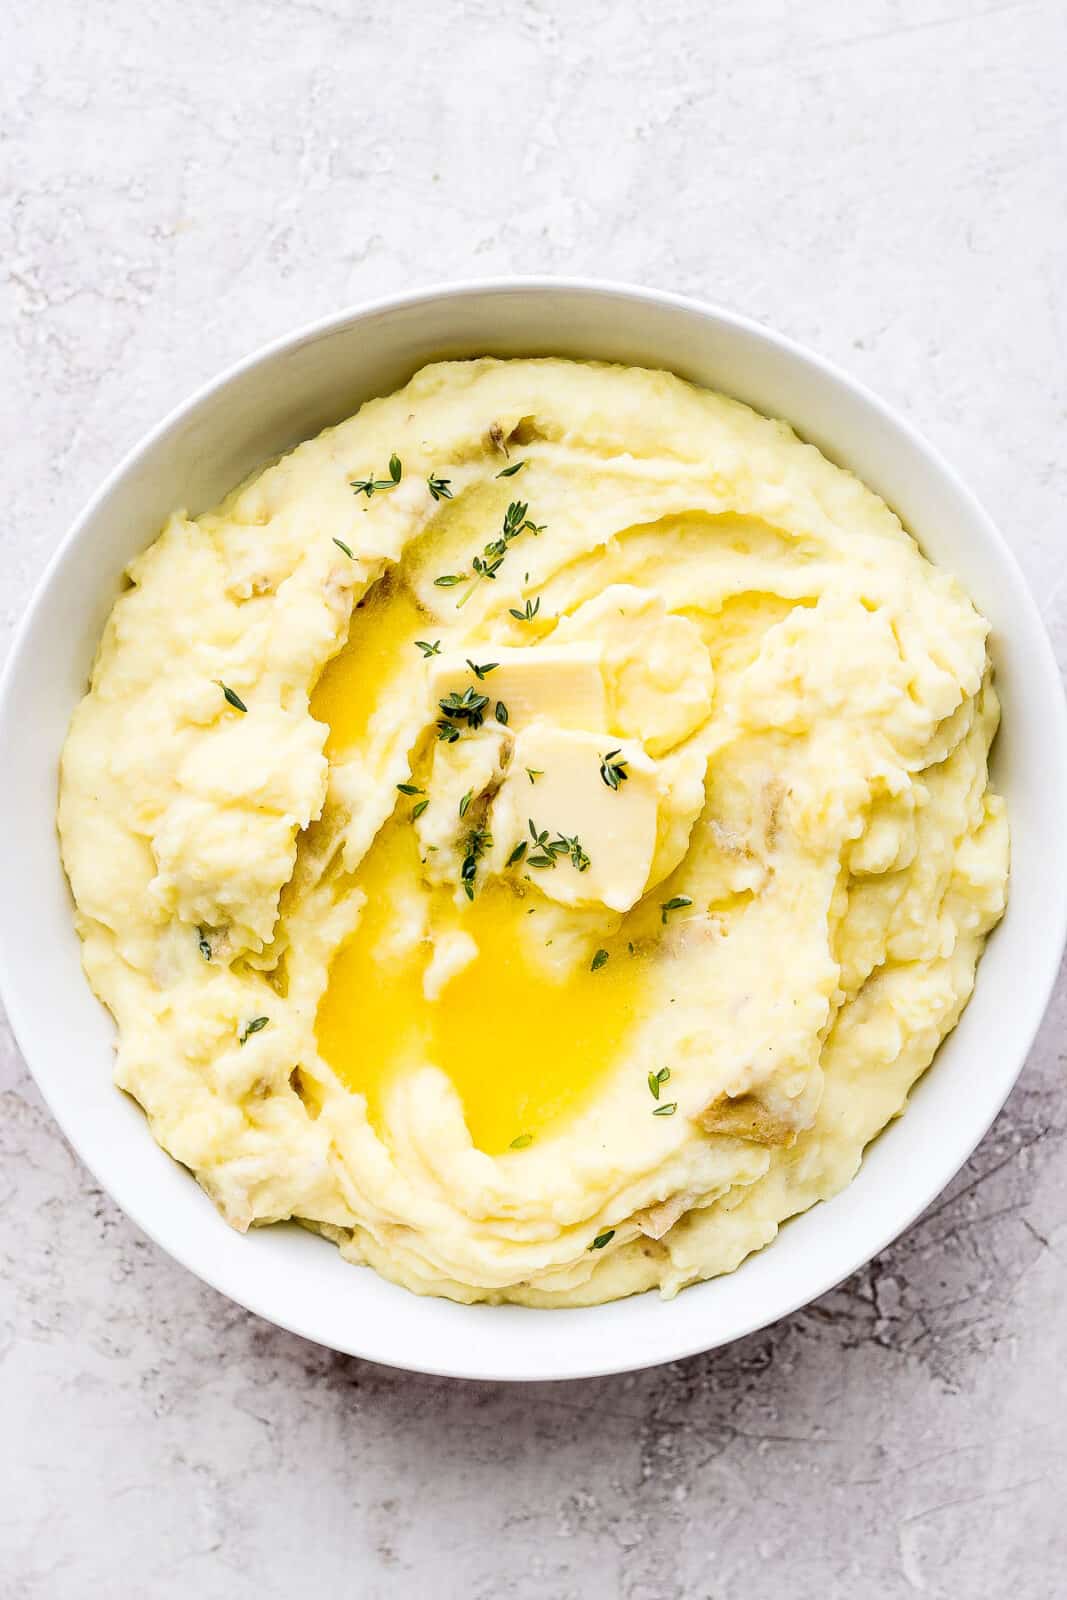 Bowl of ultimate yukon gold mashed potatoes with some butter and thyme on top.